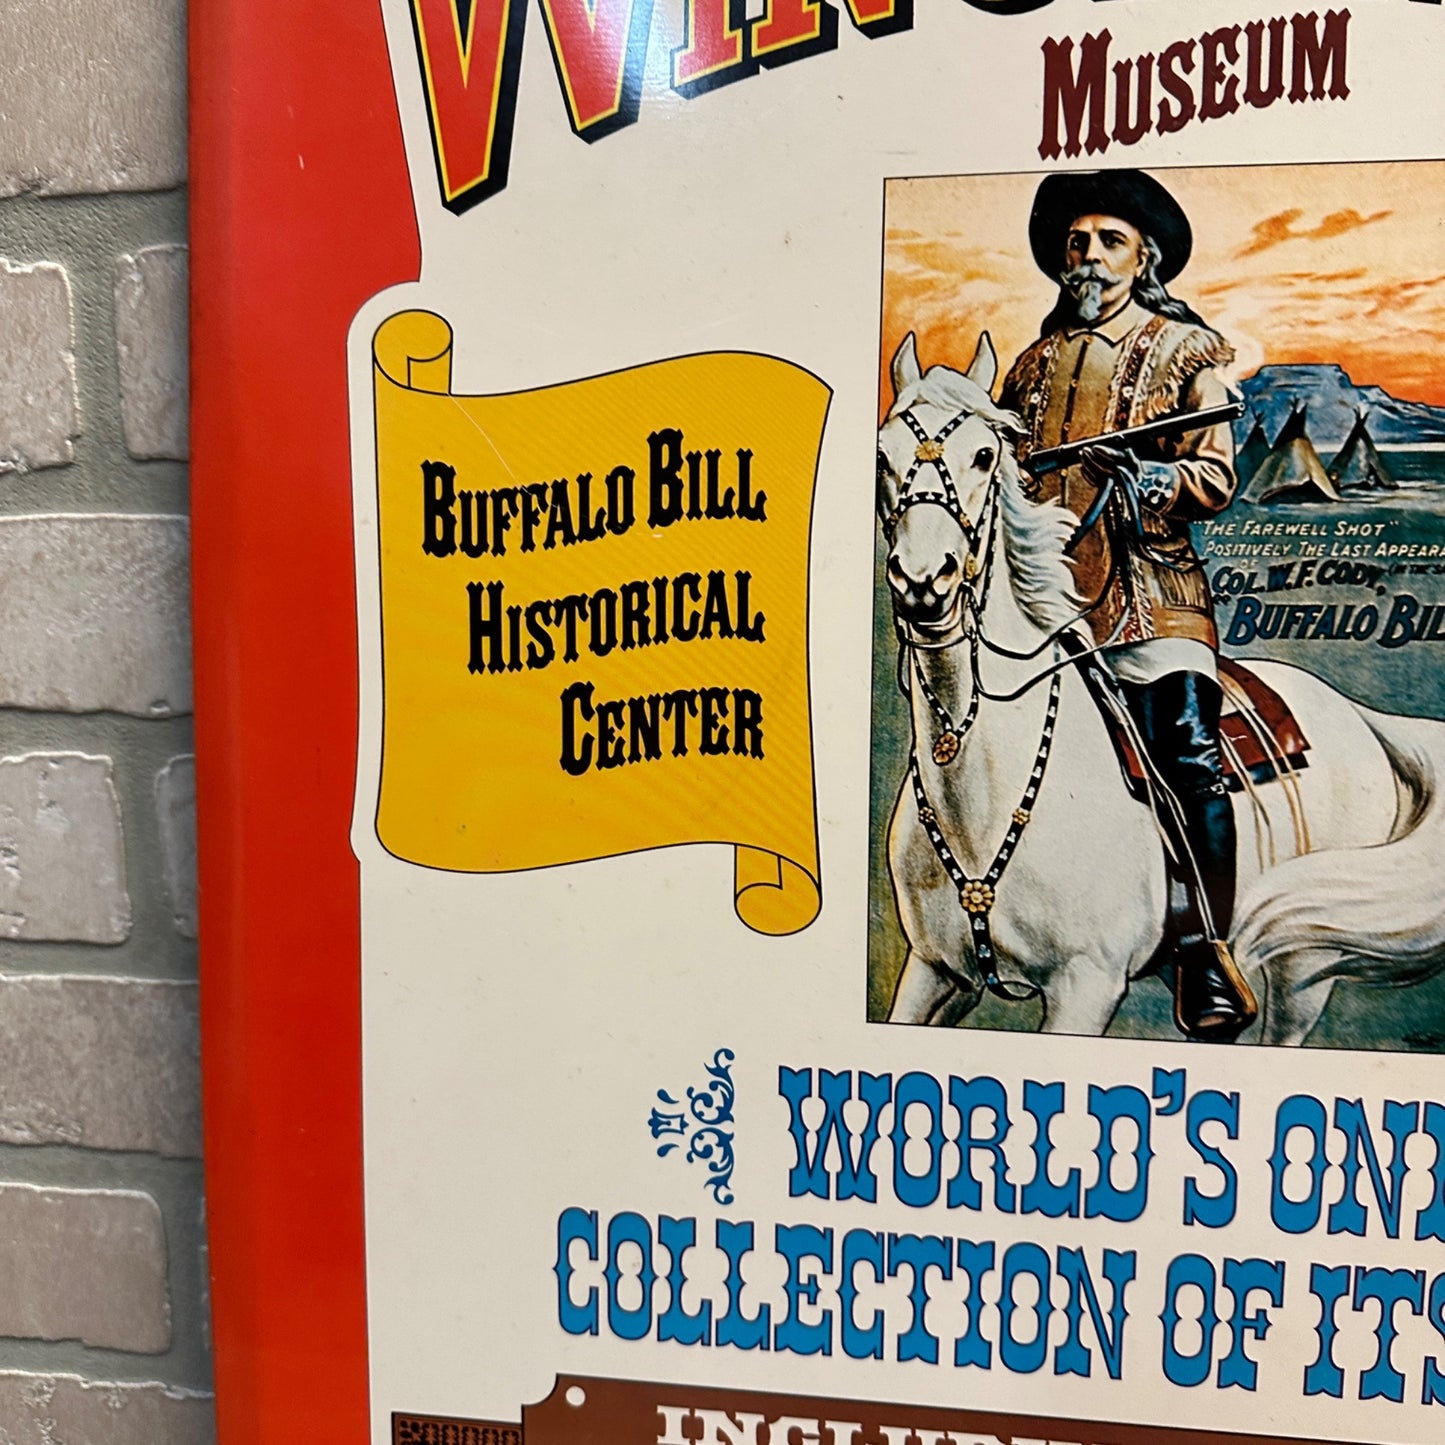 VINTAGE 1976 WINCHESTER GUN COLLECTION CODY WY MUSEUM METAL ADVERTISEMENT SIGN